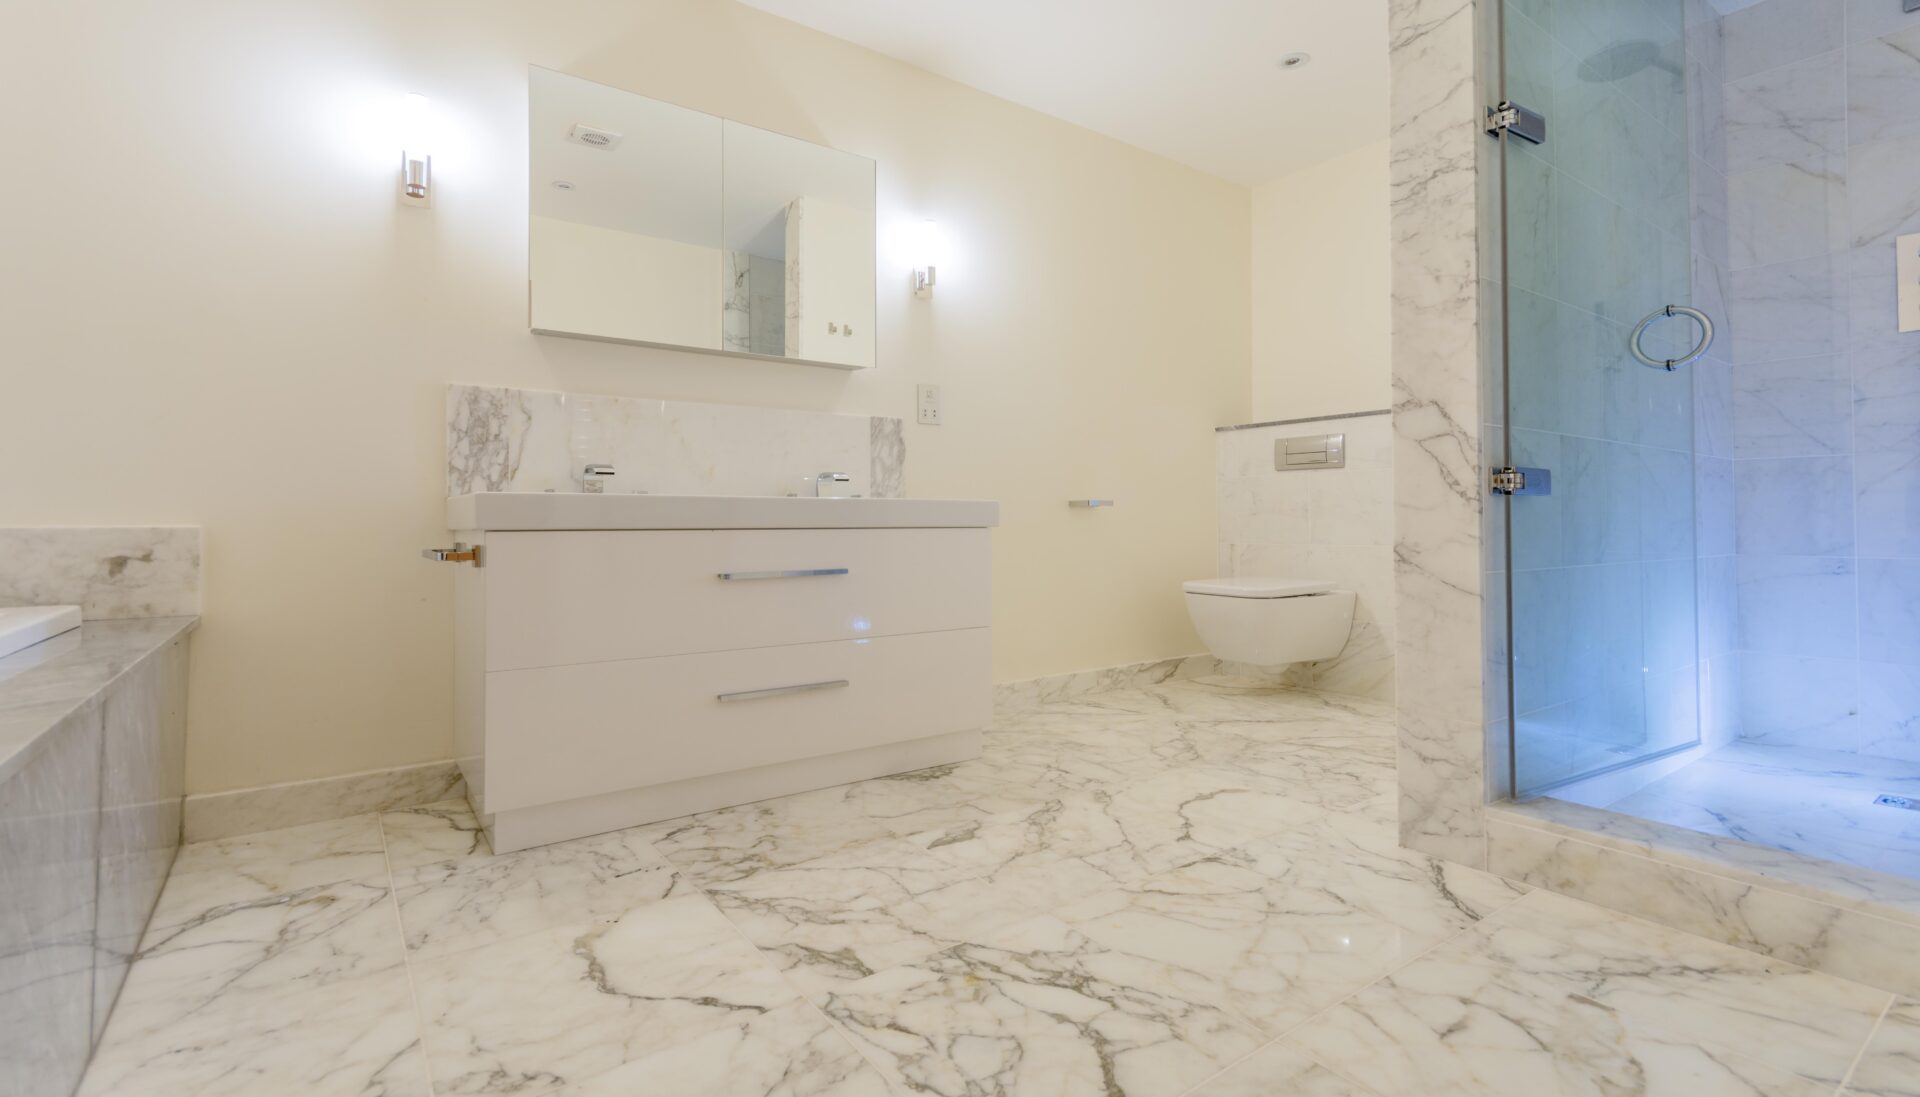 white marble bathroom LED lights modern style image no people photograph photography long smart well organised colour